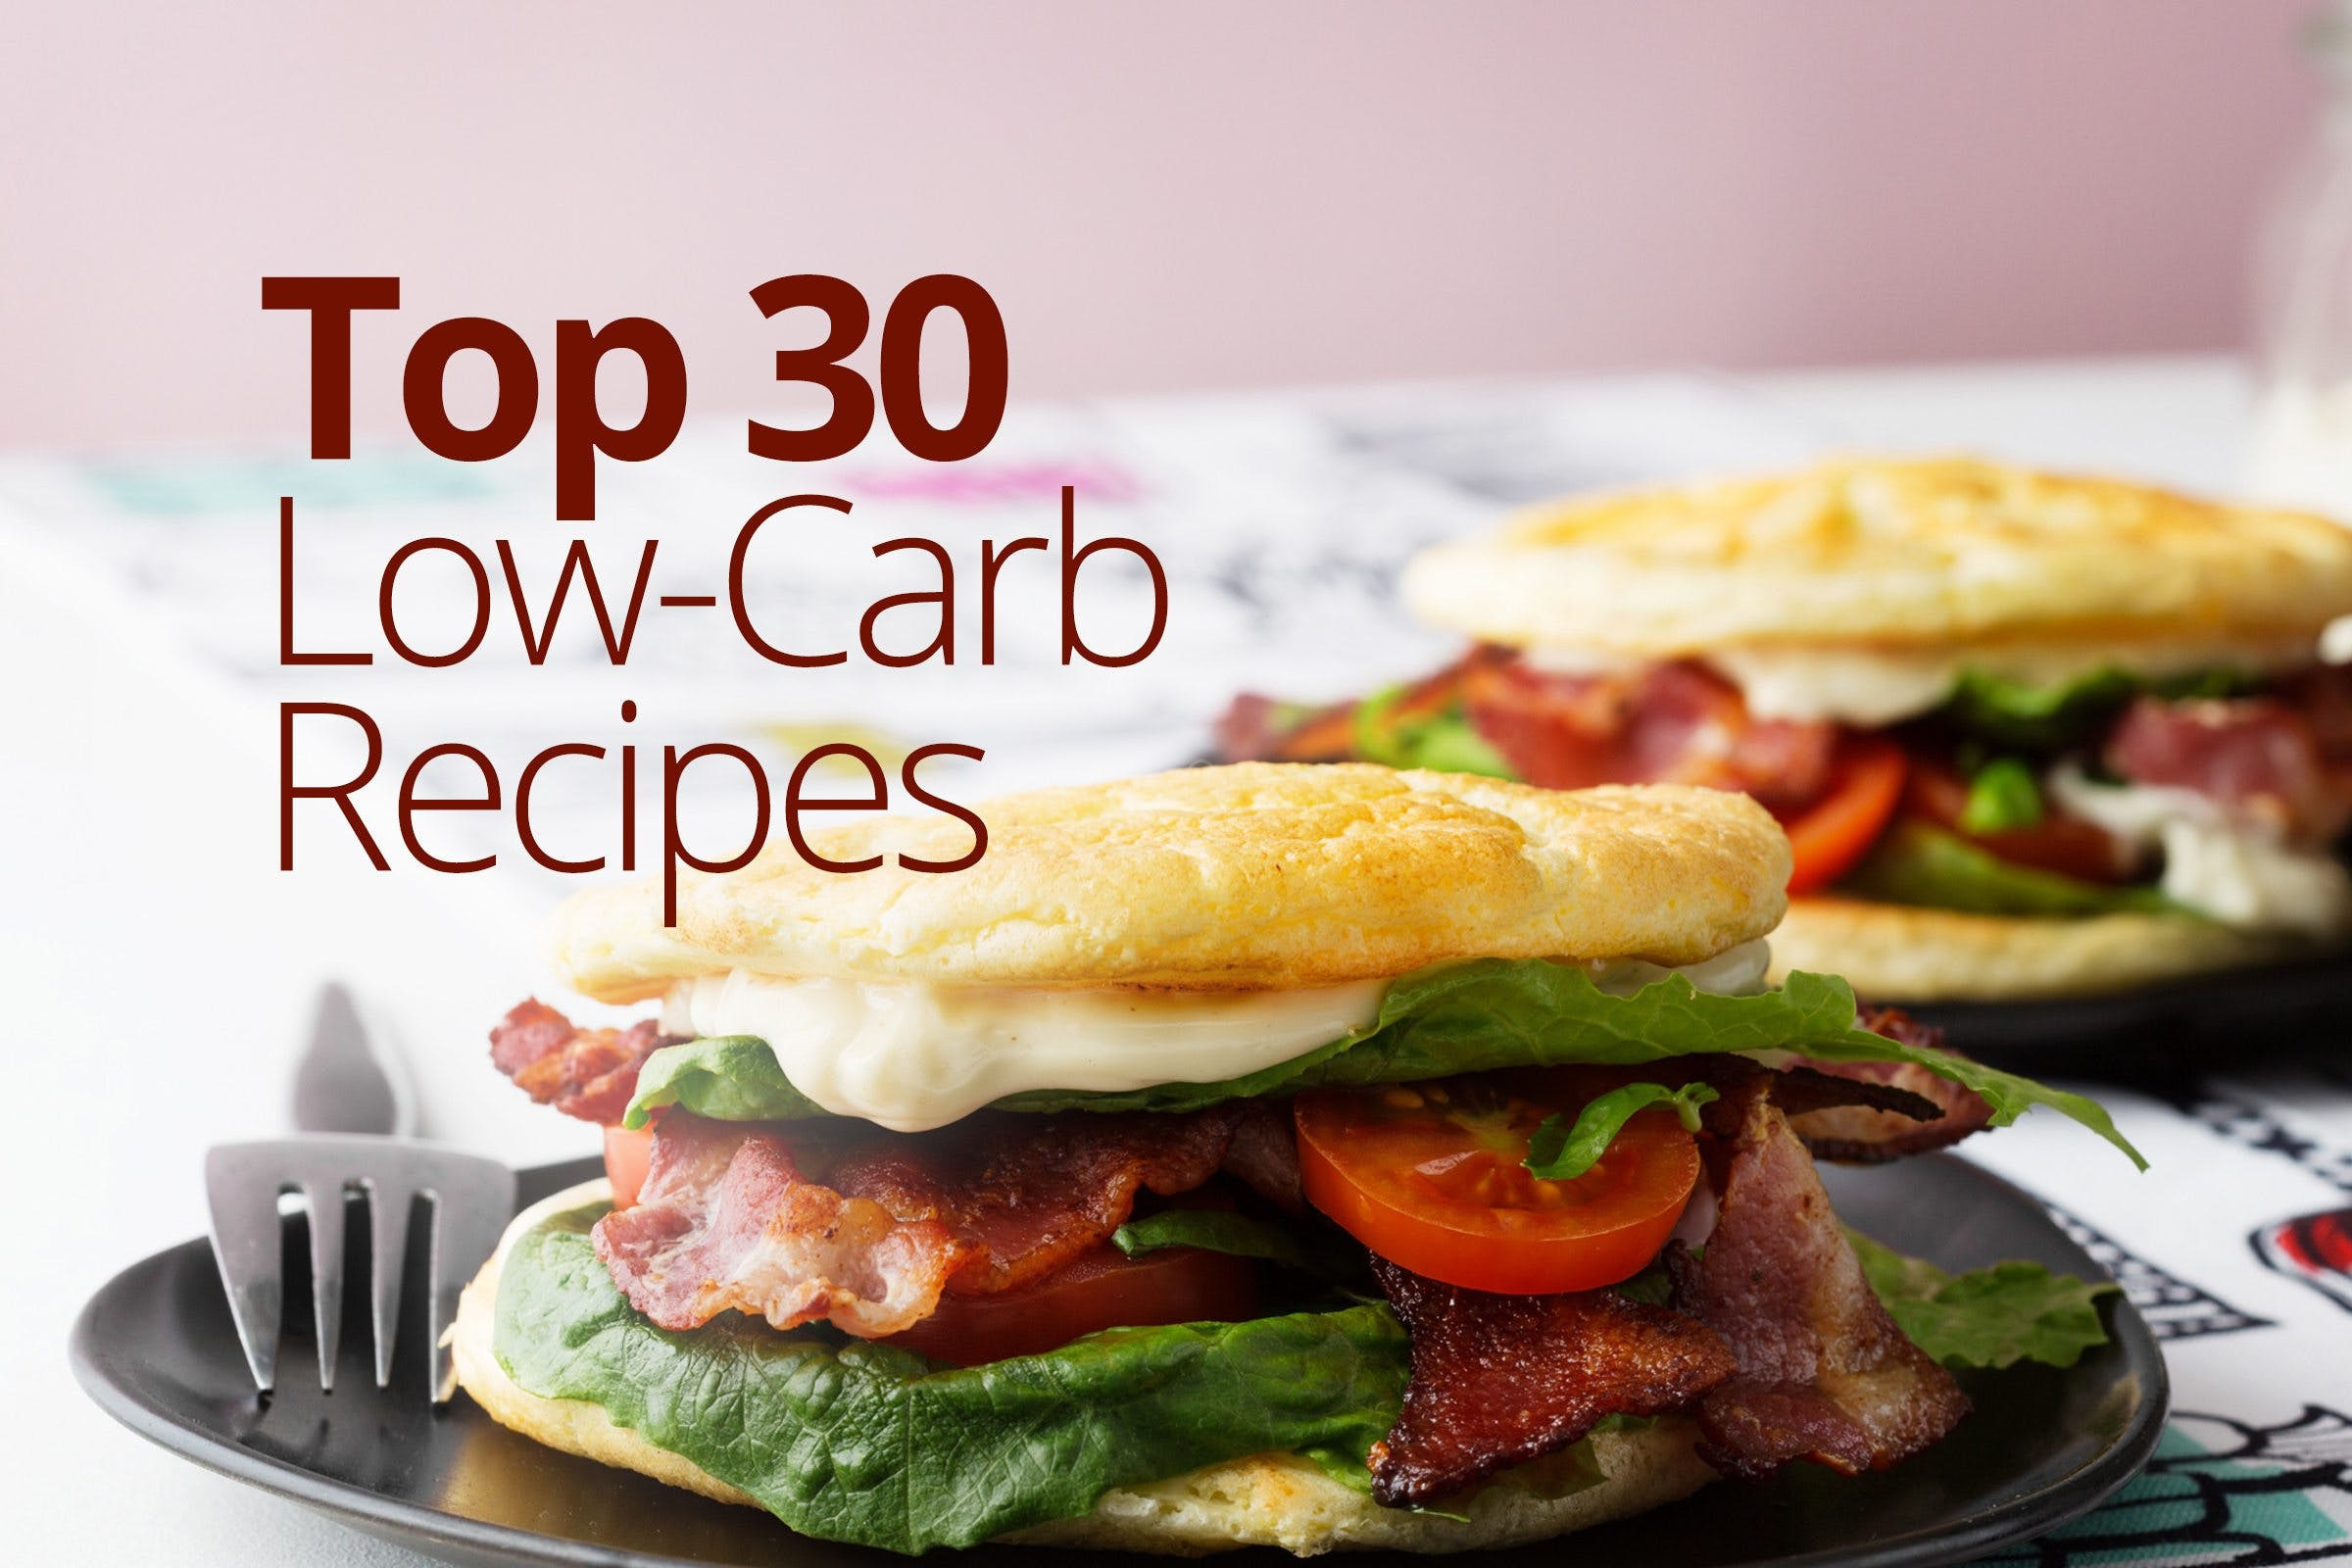 Low Carb Diet Recipes Meals
 Top 30 Low Carb Recipes Simple & Delicious Inspiration